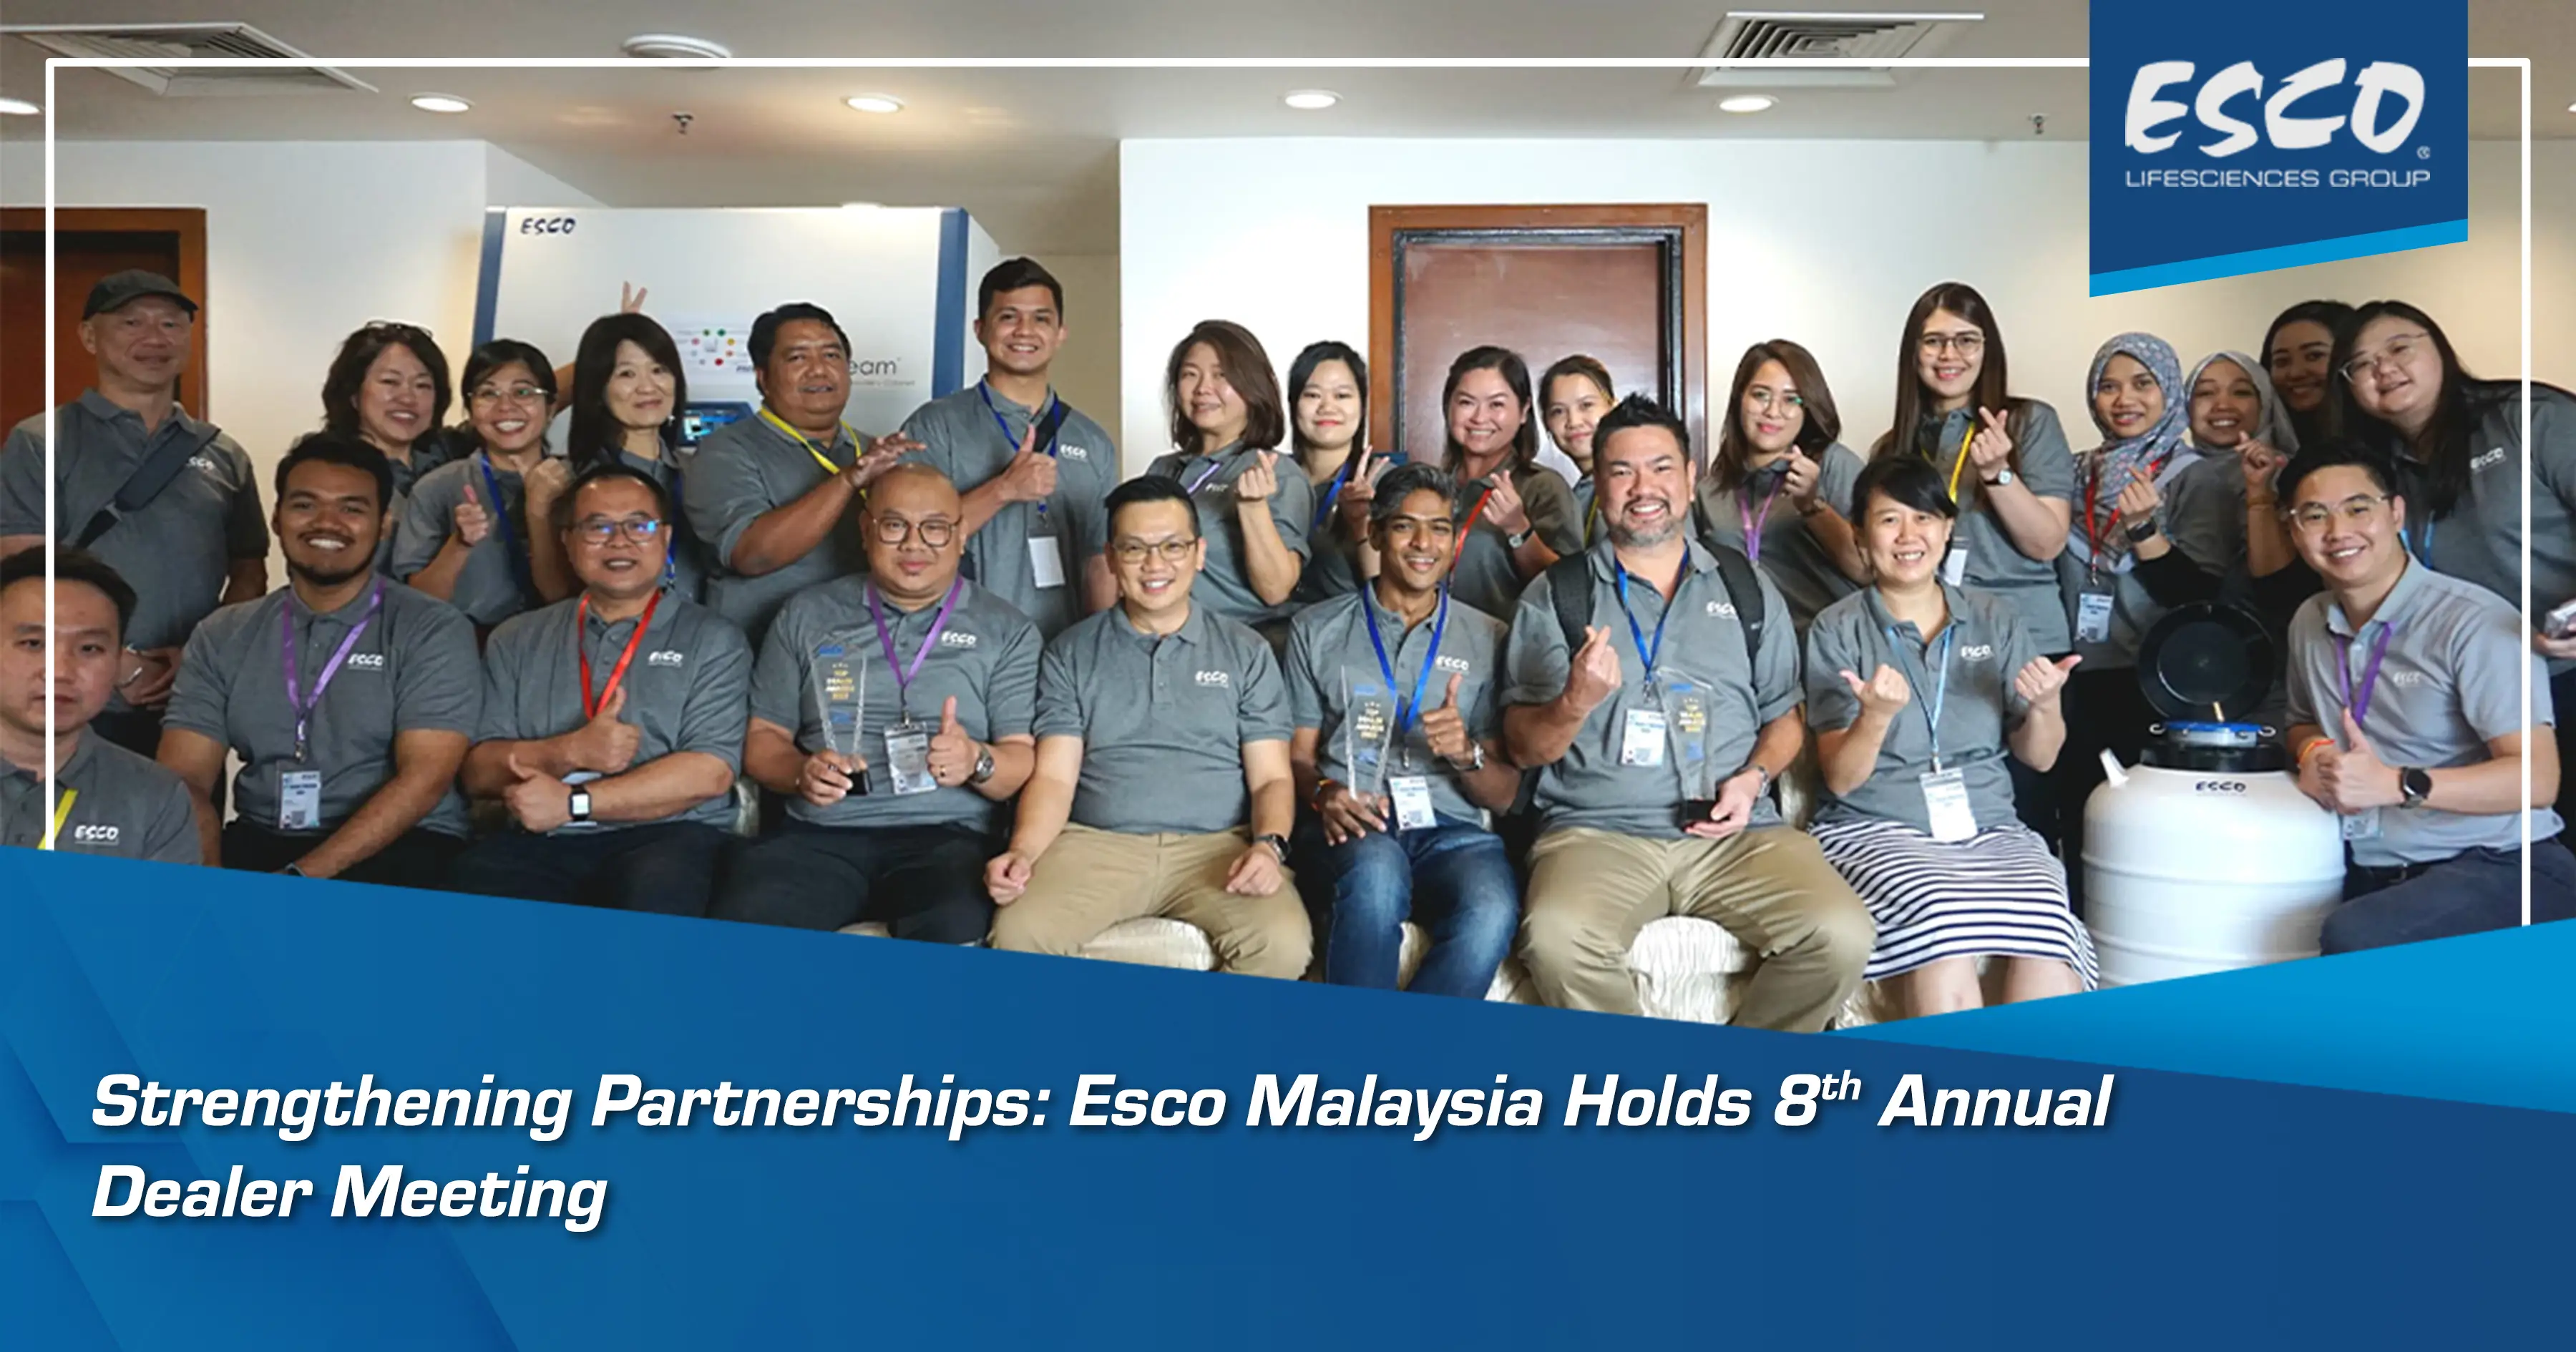 Strengthening Partnerships: Esco Malaysia Holds 8th Annual Dealer Meeting